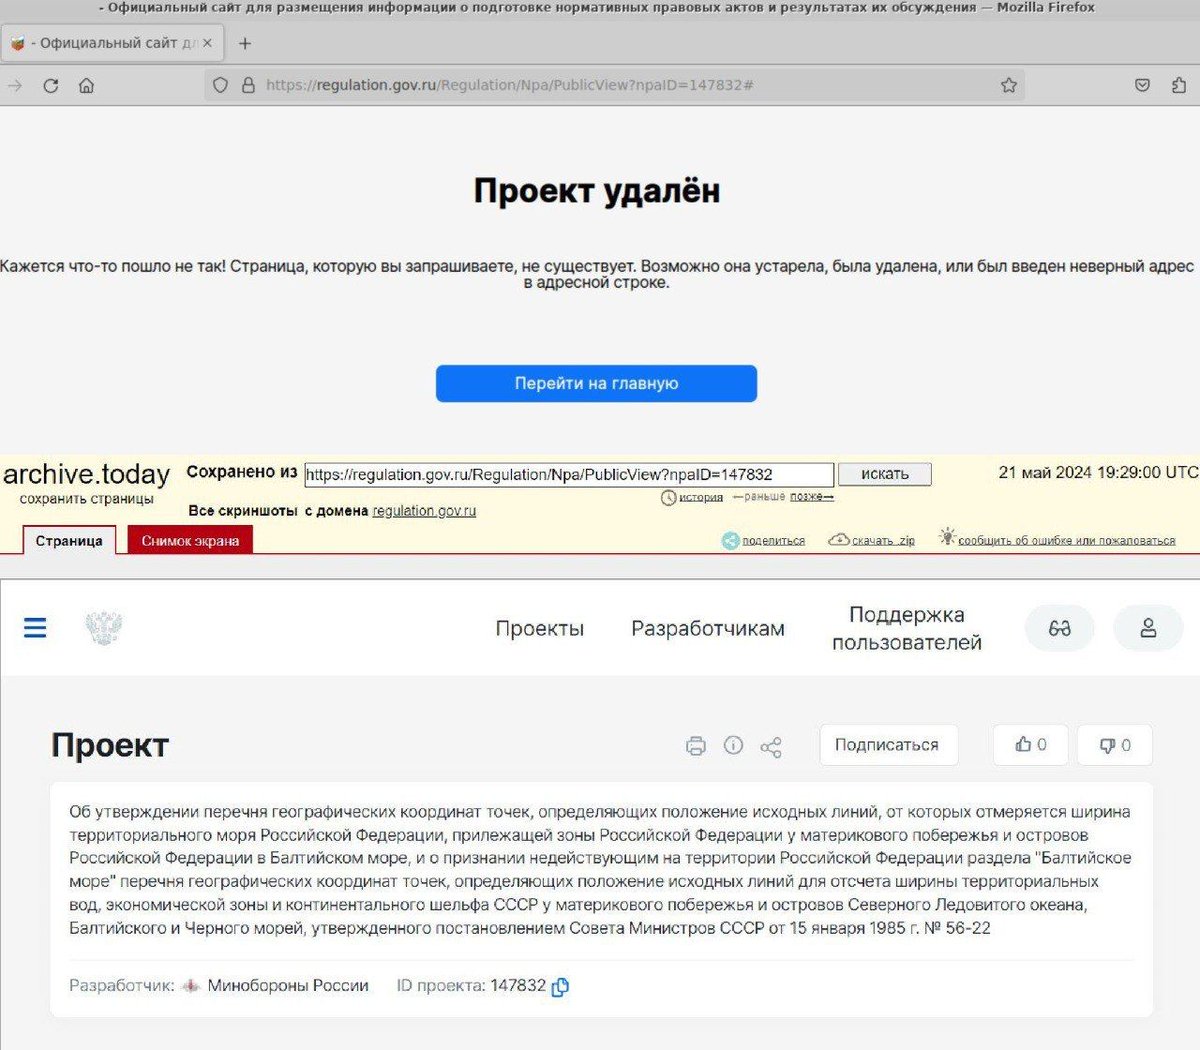 The draft law of the Russian defense ministry that proposed a unilateral change by Russia of its borders with Finland, Estonia and Lithuania in the Baltic Sea has disappeared from the website of the Russian government. Putin continues probing NATO and studying their true 'red